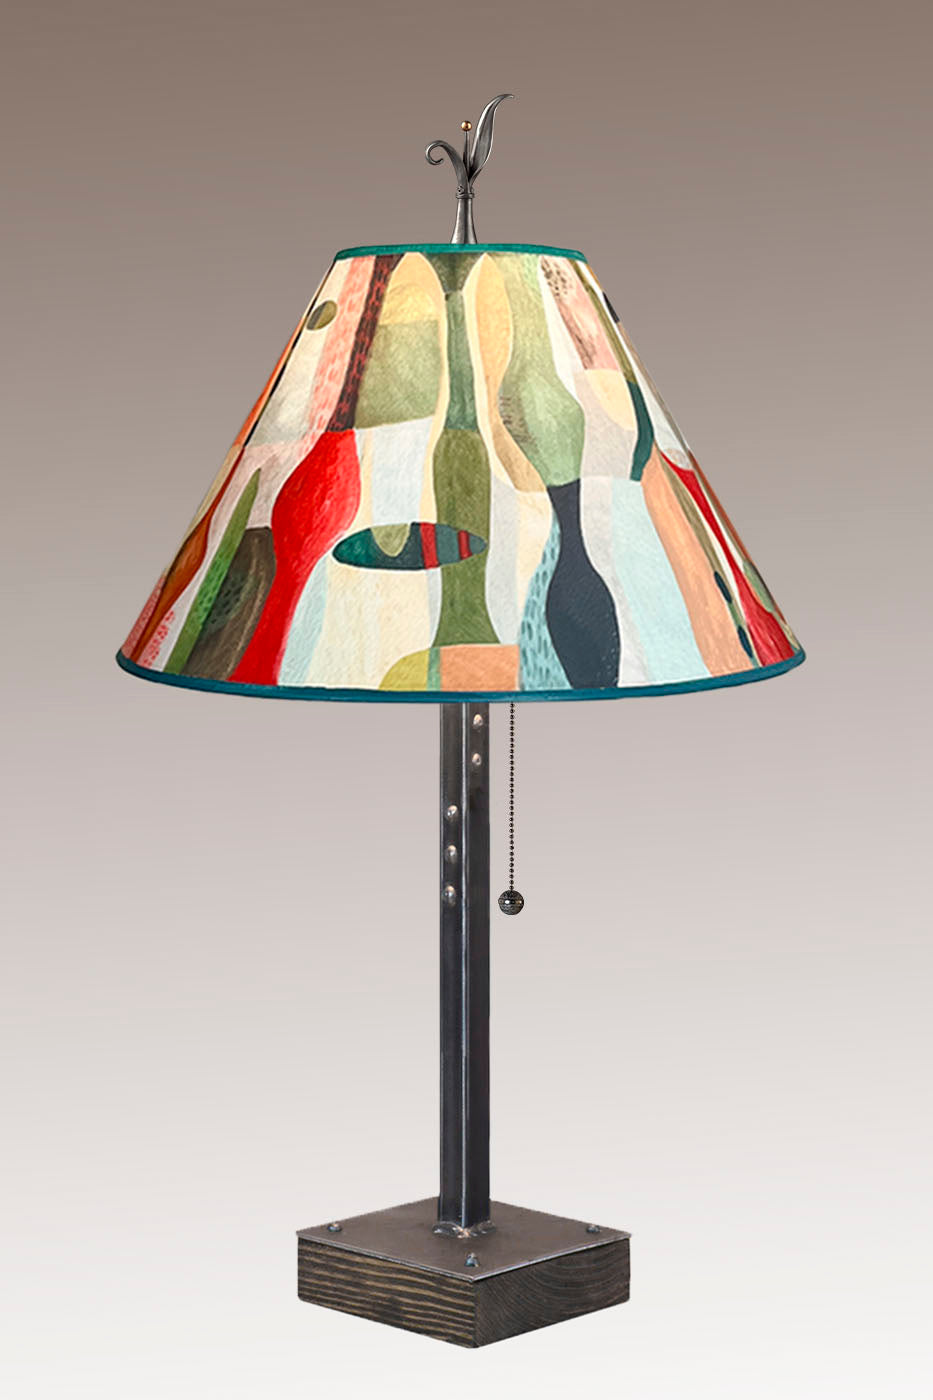 Janna Ugone & Co Table Lamp Steel Table Lamp on Wood with Medium Conical Shade in Riviera in Poppy